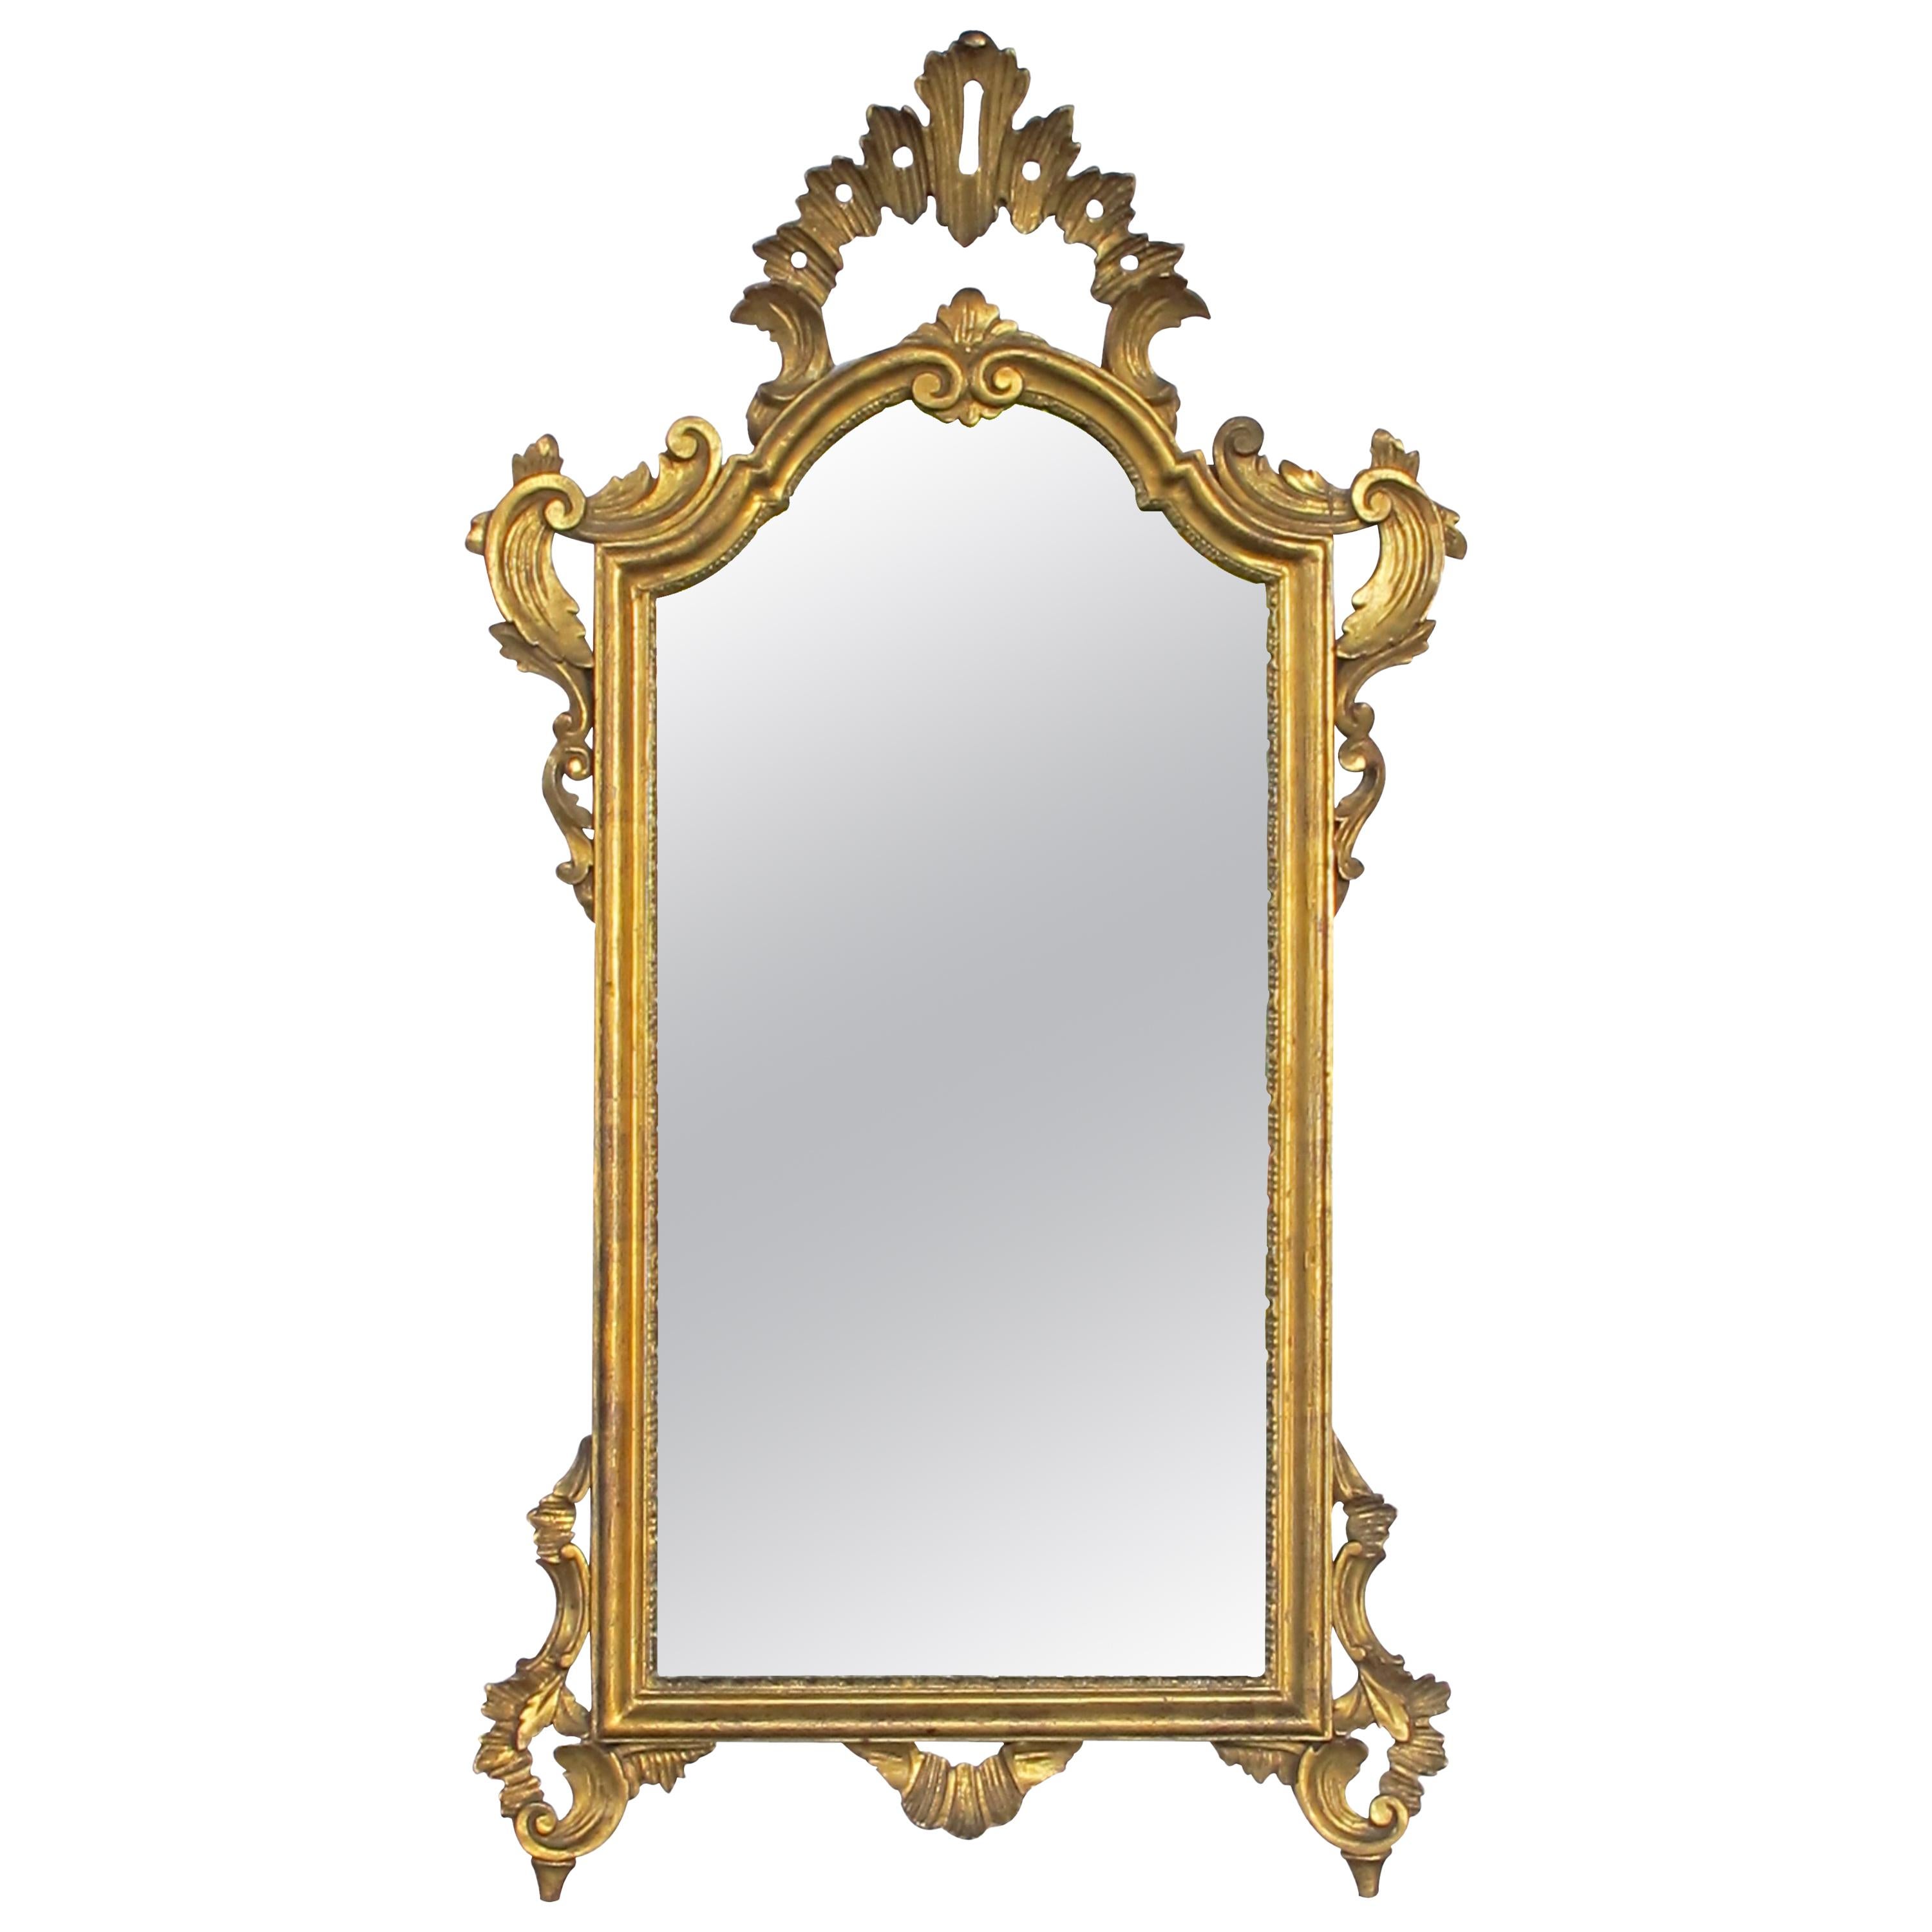 Shapely Italian Rococo Style Carved Giltwood Mirror with Openwork Rocaille Crest